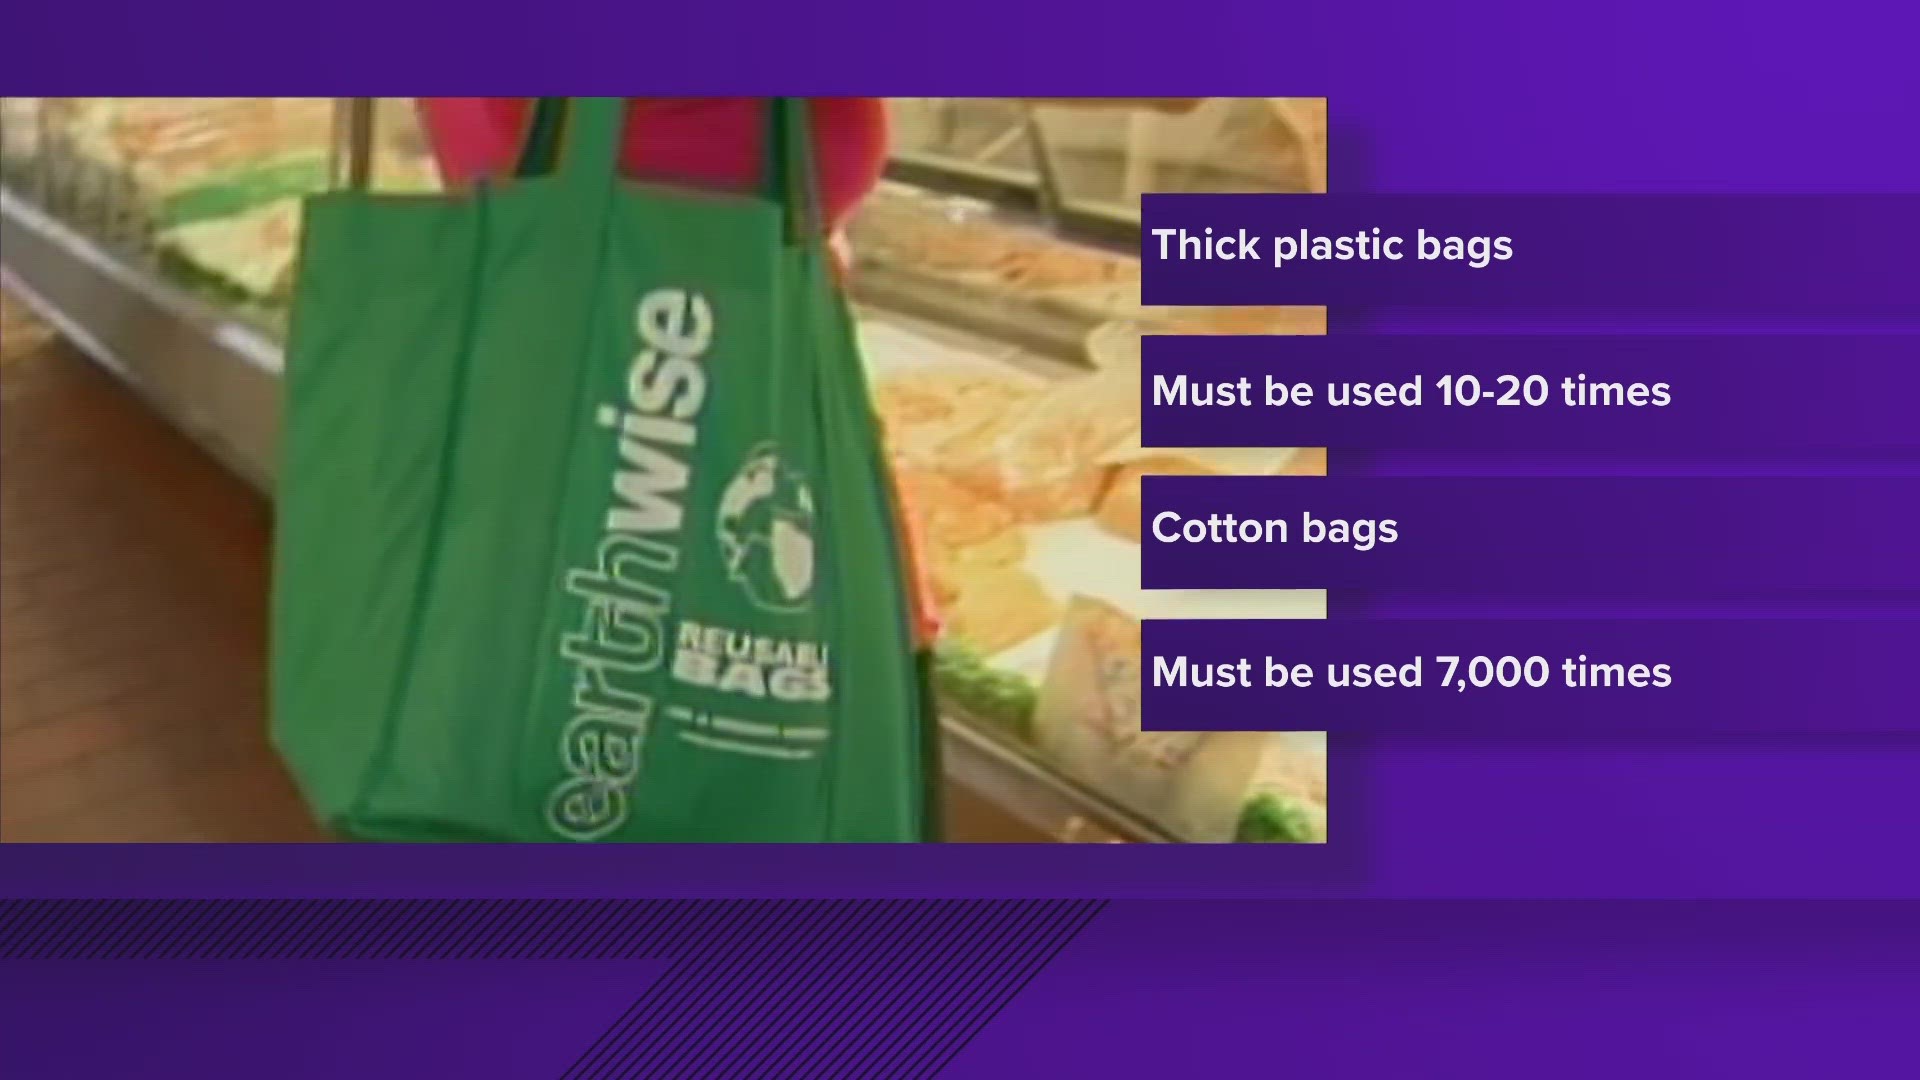 A UN report says cloth or thick plastic reusable bags may actually have a much higher carbon footprint than common thin plastic shopping bags.